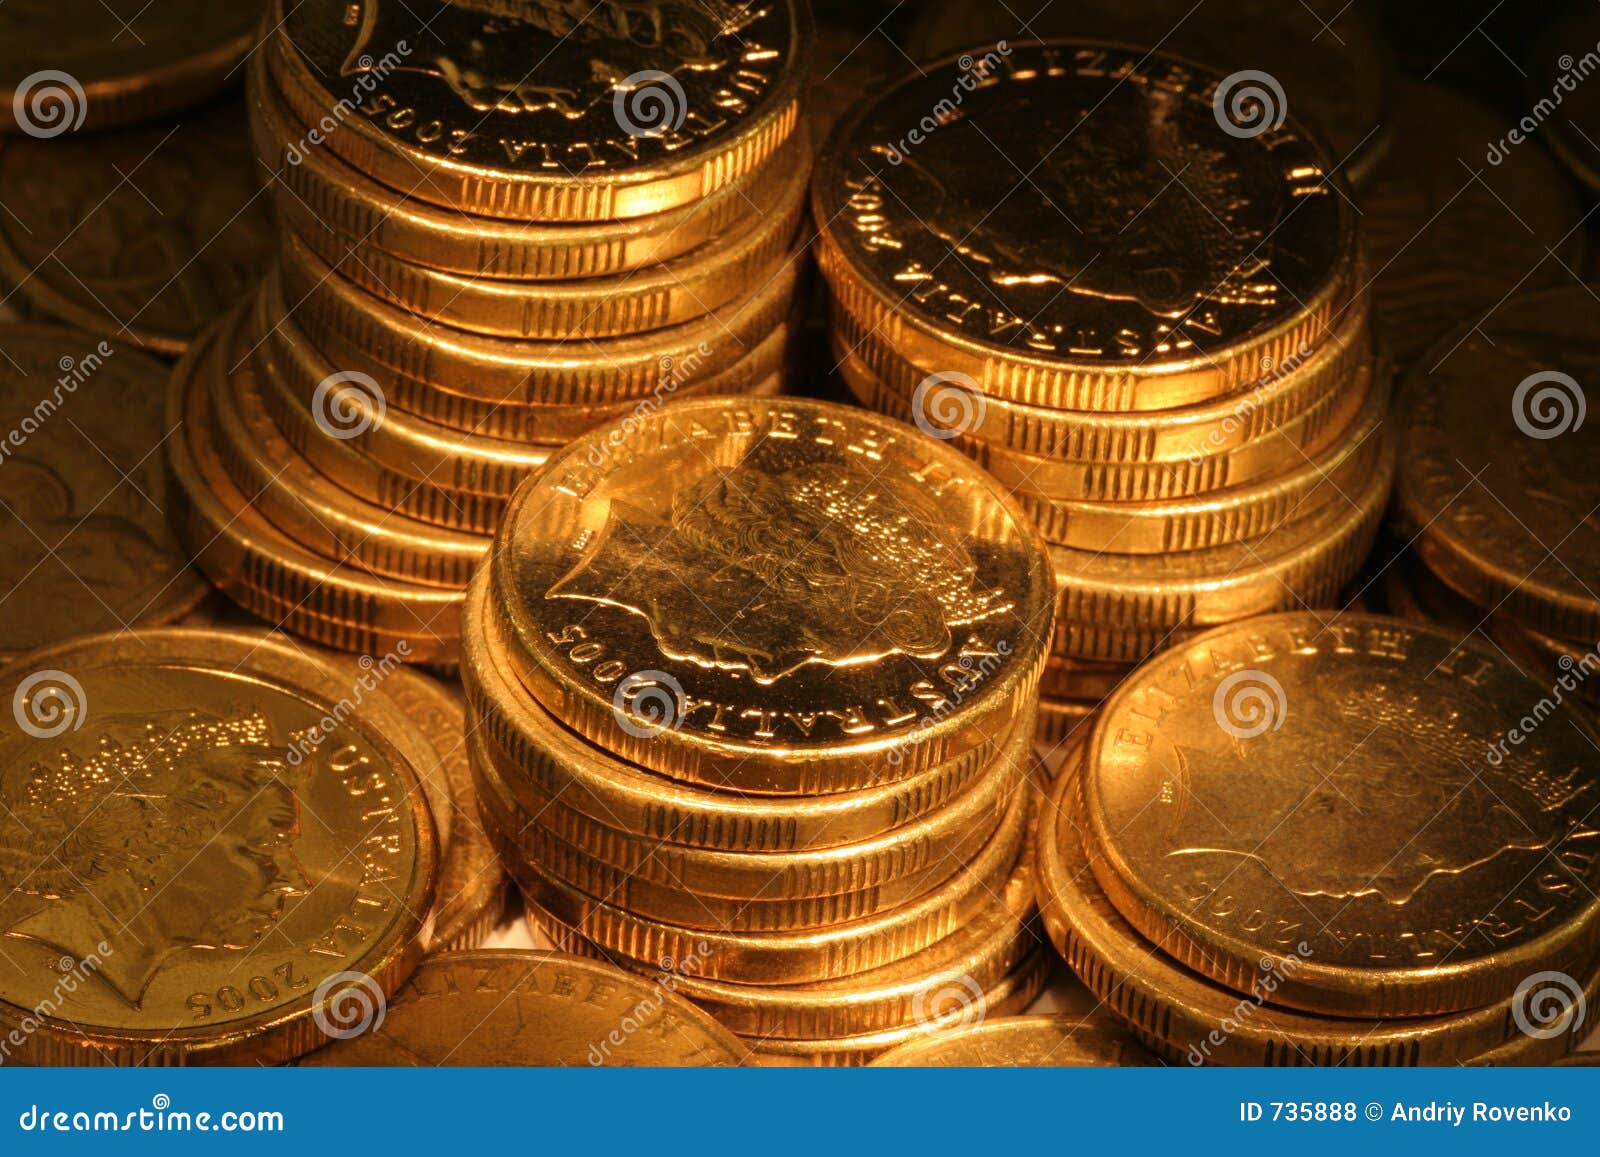 Golden coins stock photo. Image of finances, value, gold - 7358881300 x 957